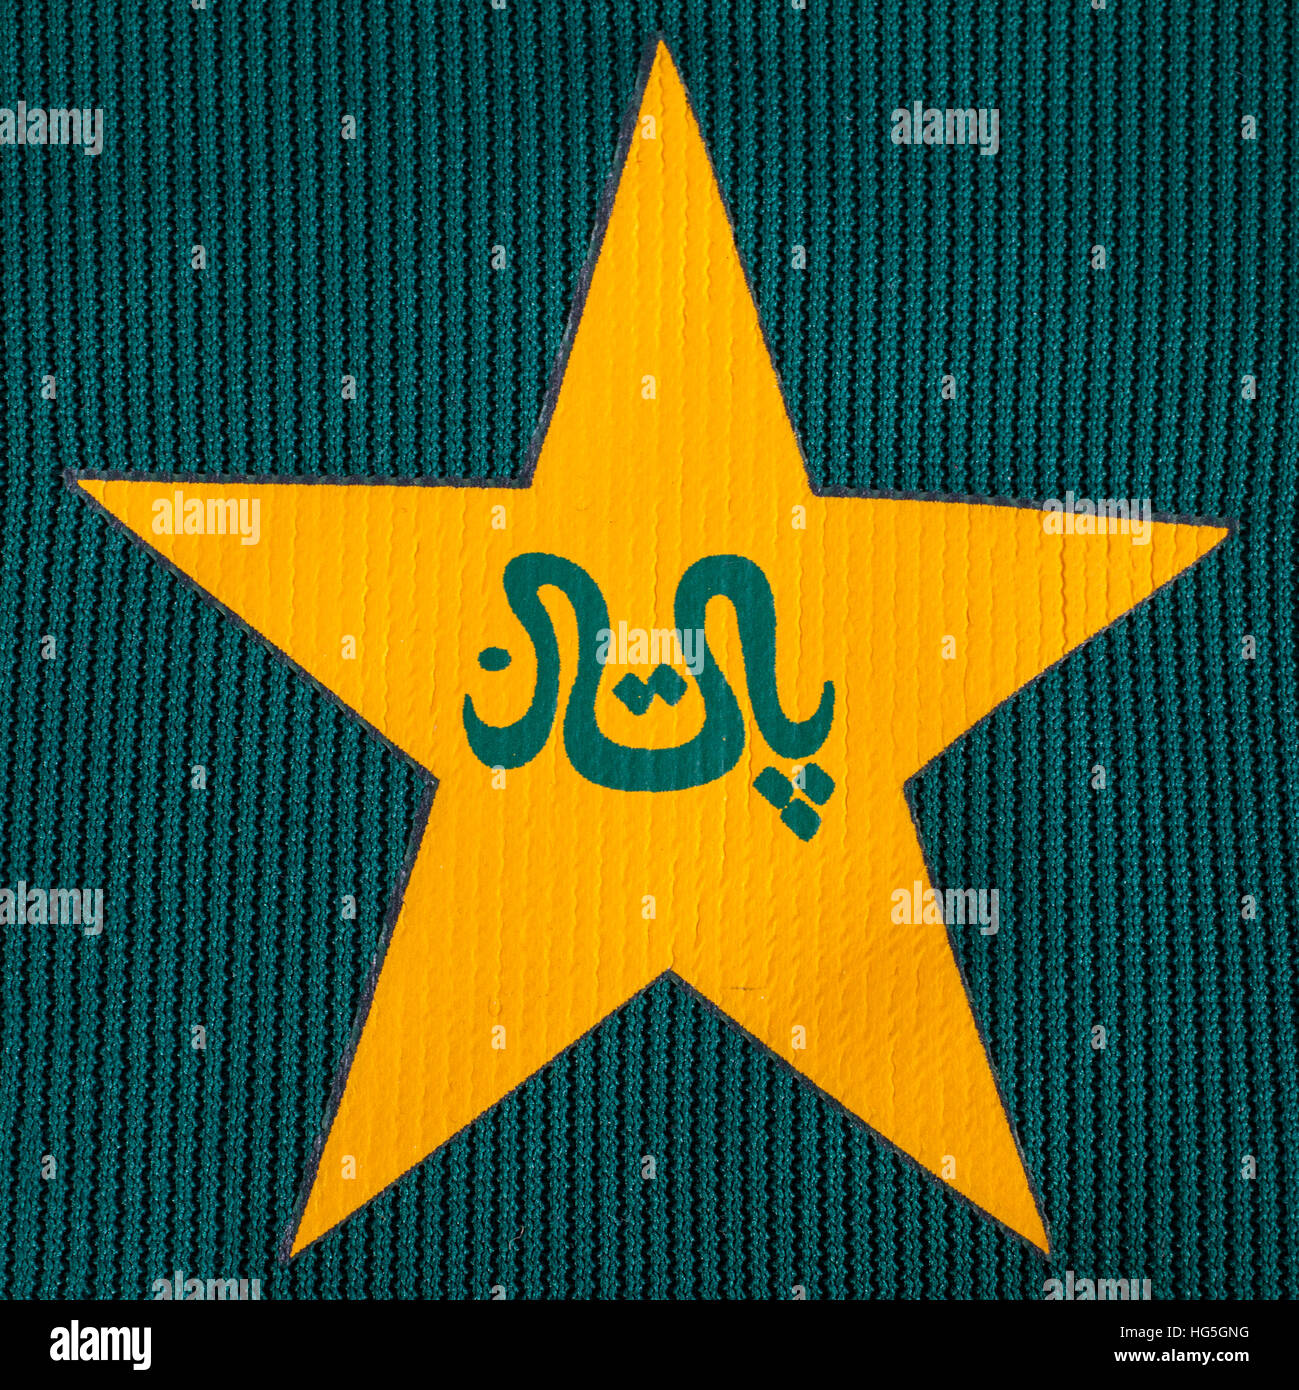 London Uk October 15th 2015 The Badge For The Pakistan Cricket